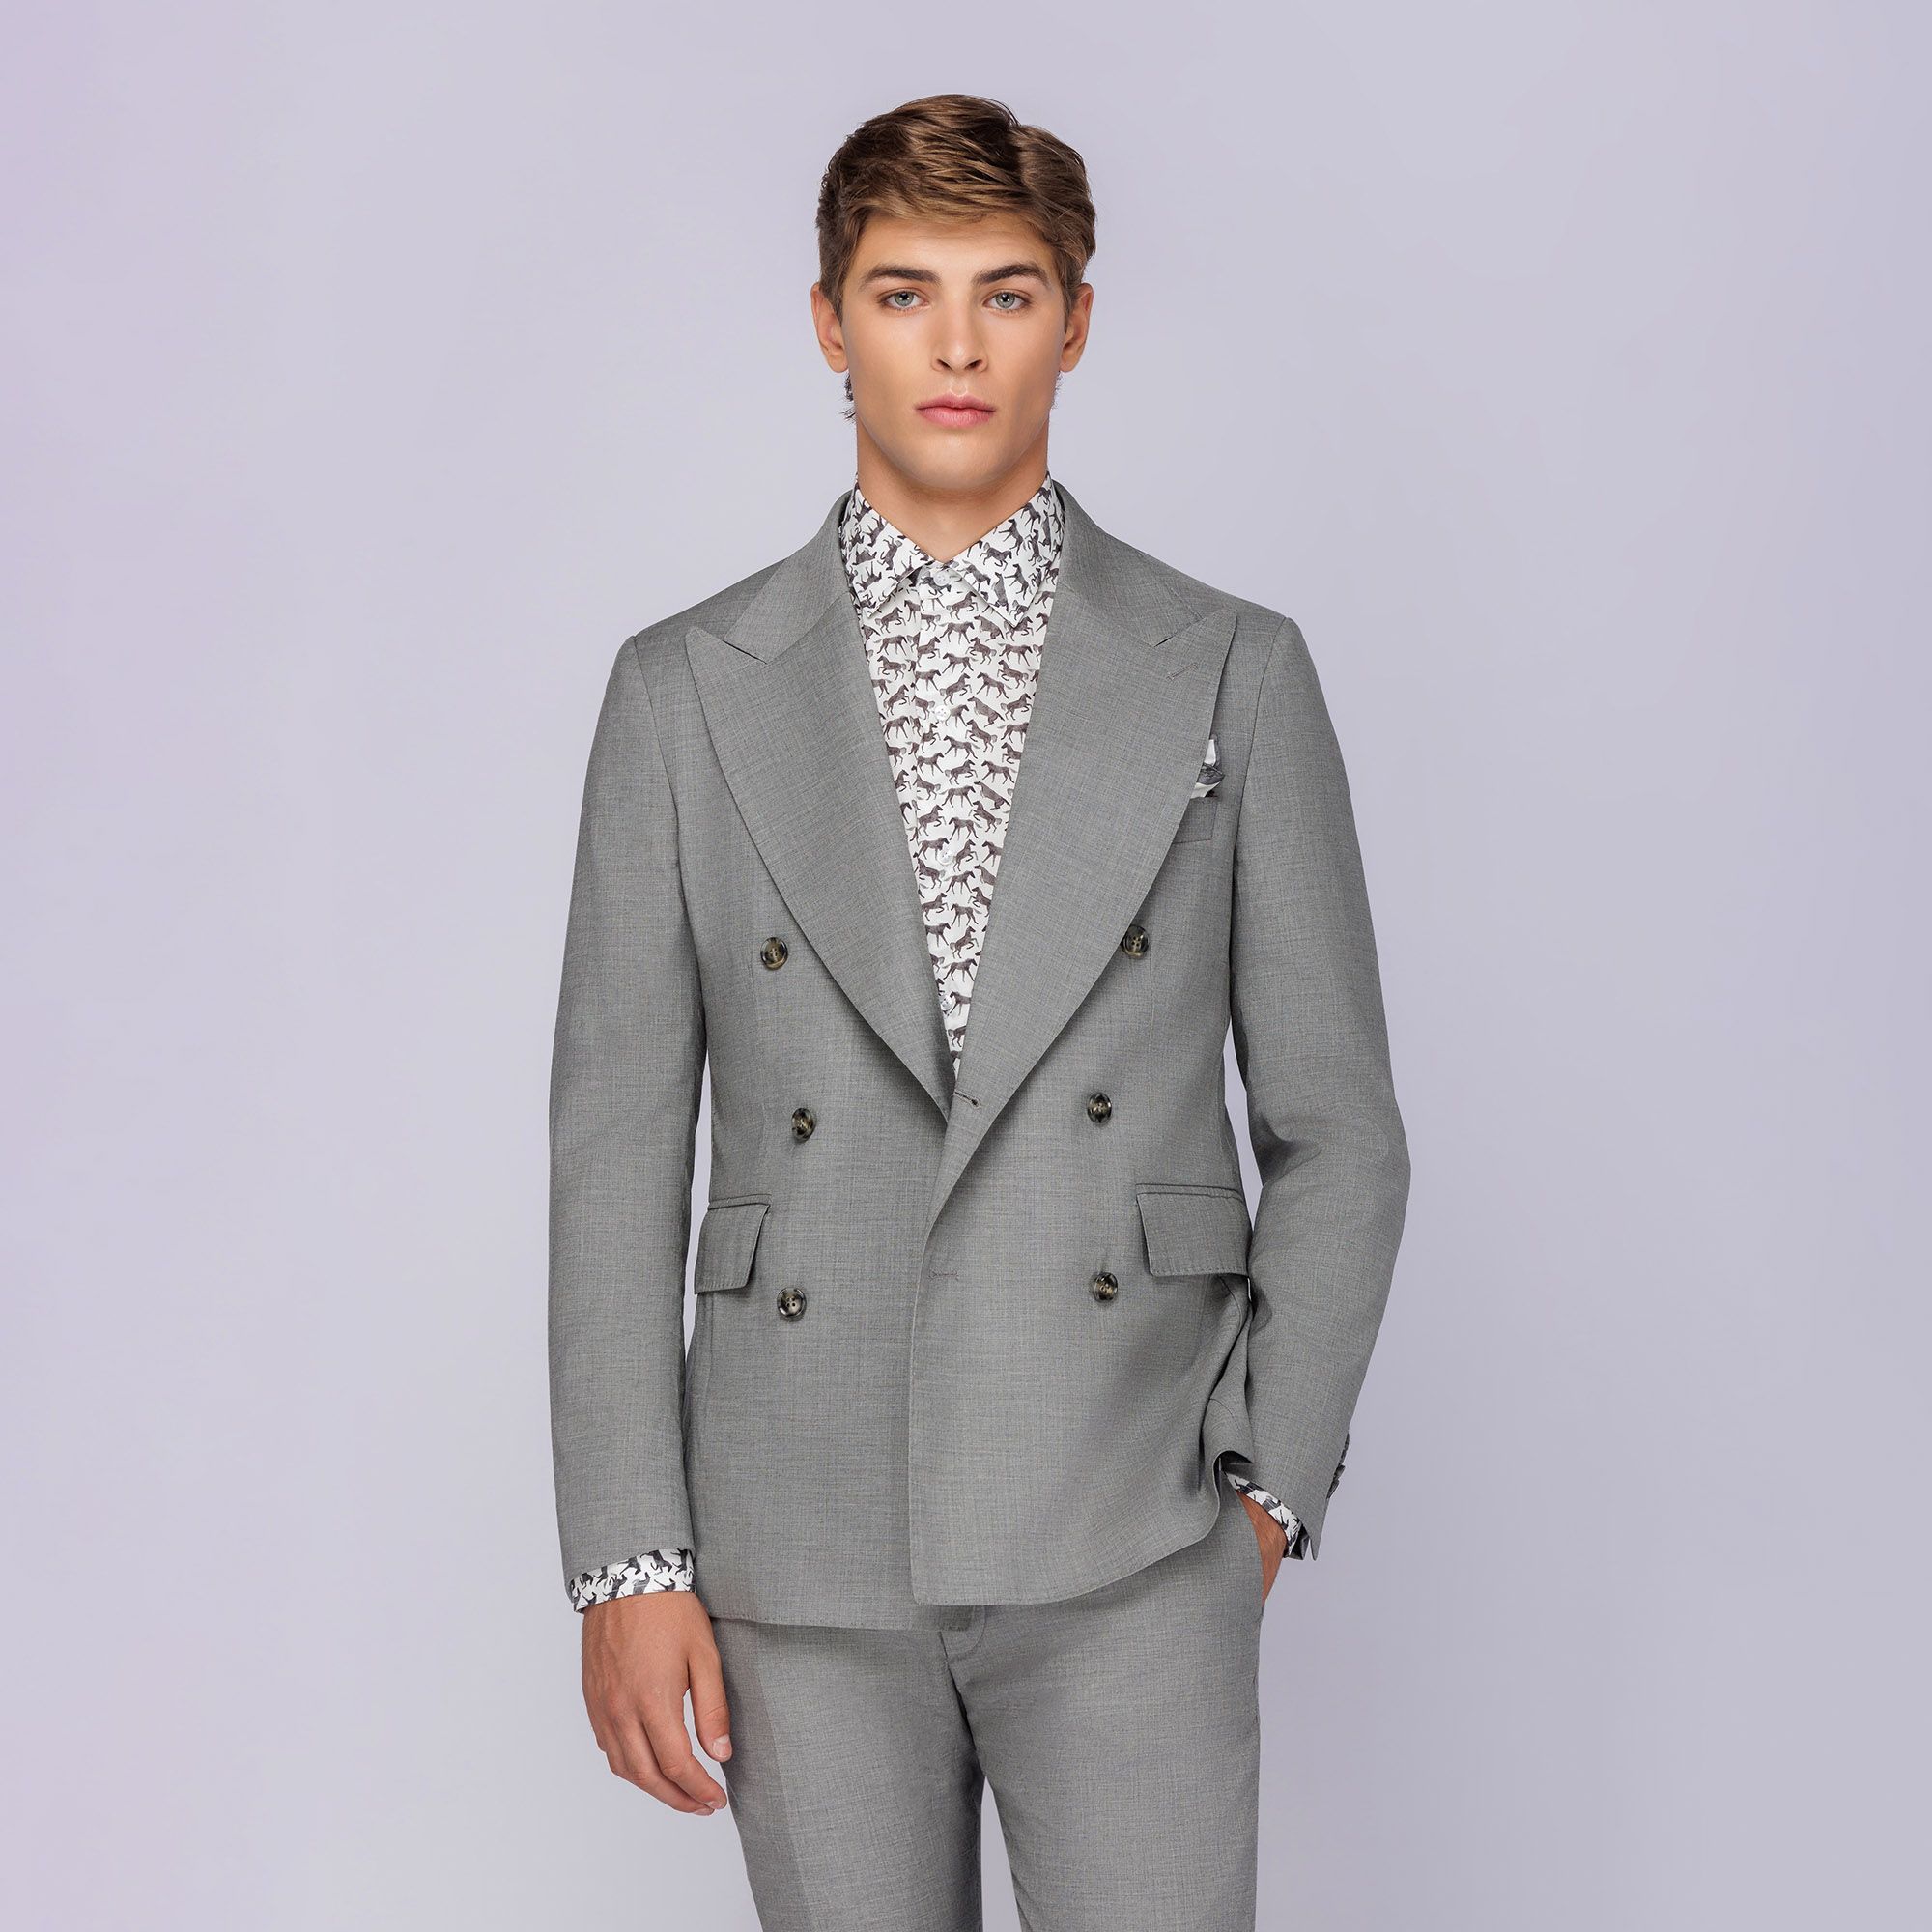 GREY DOUBLE BREASTED SUIT